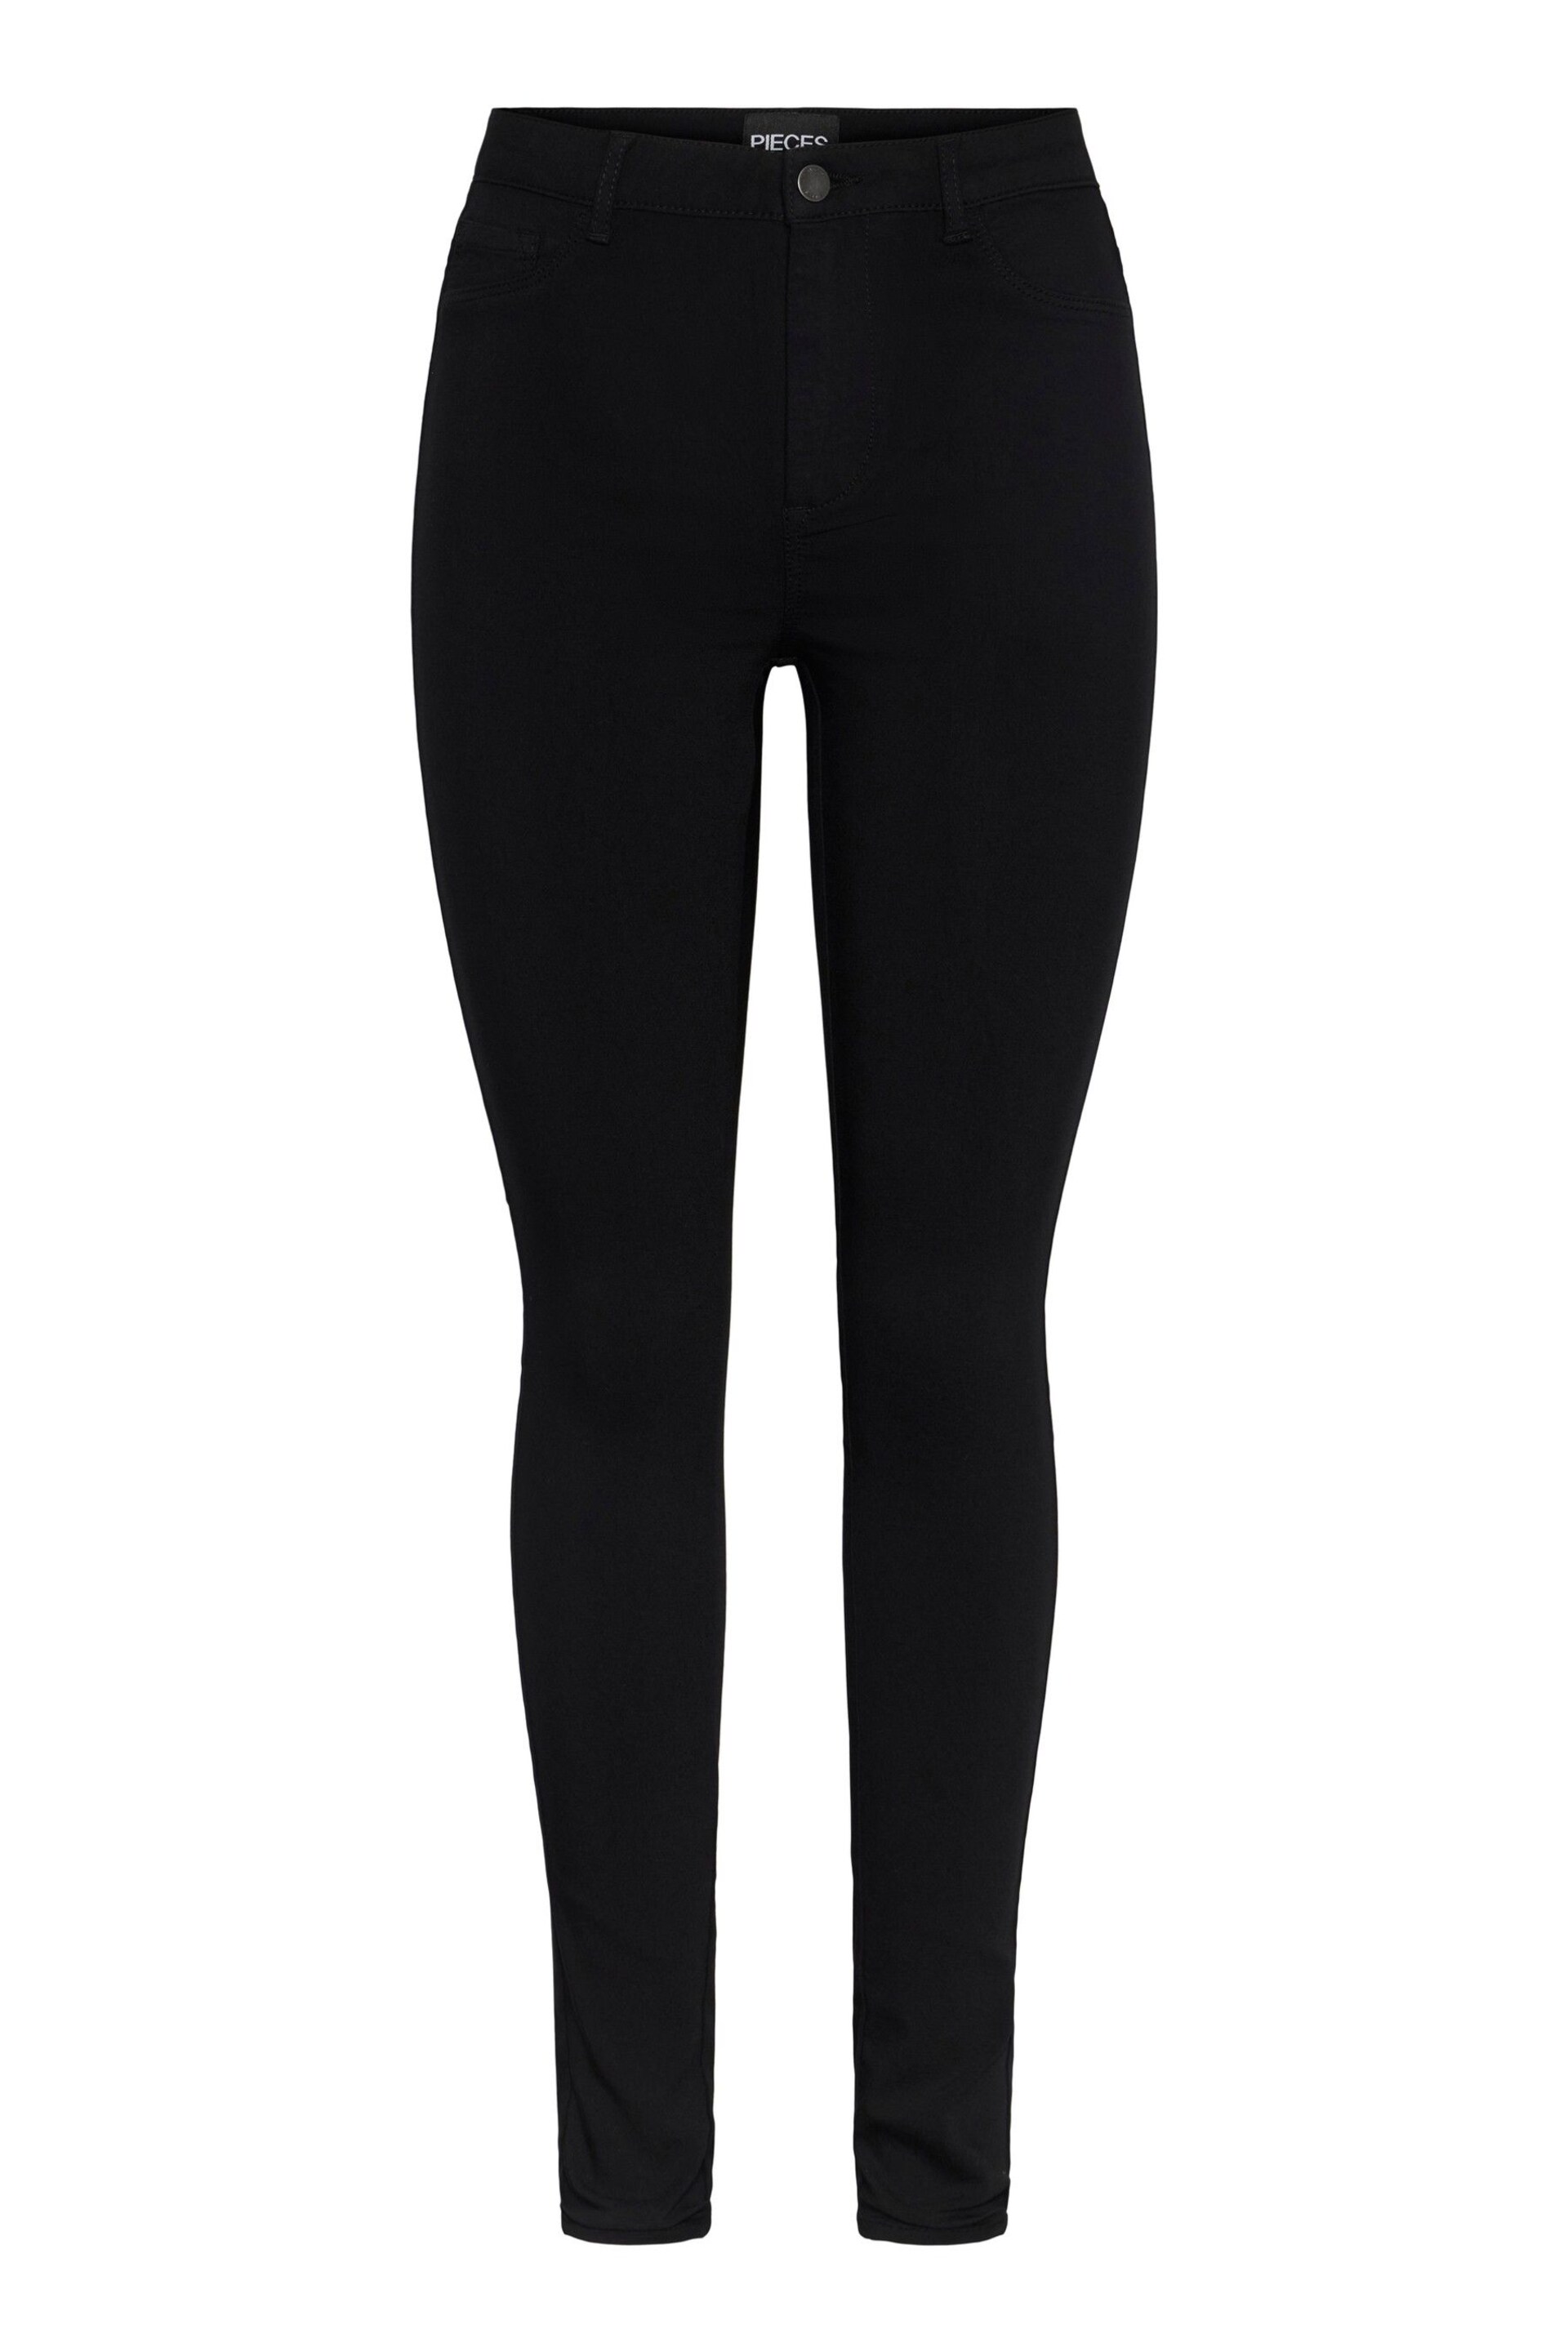 PIECES Black High Waist Jeggings - Image 6 of 6